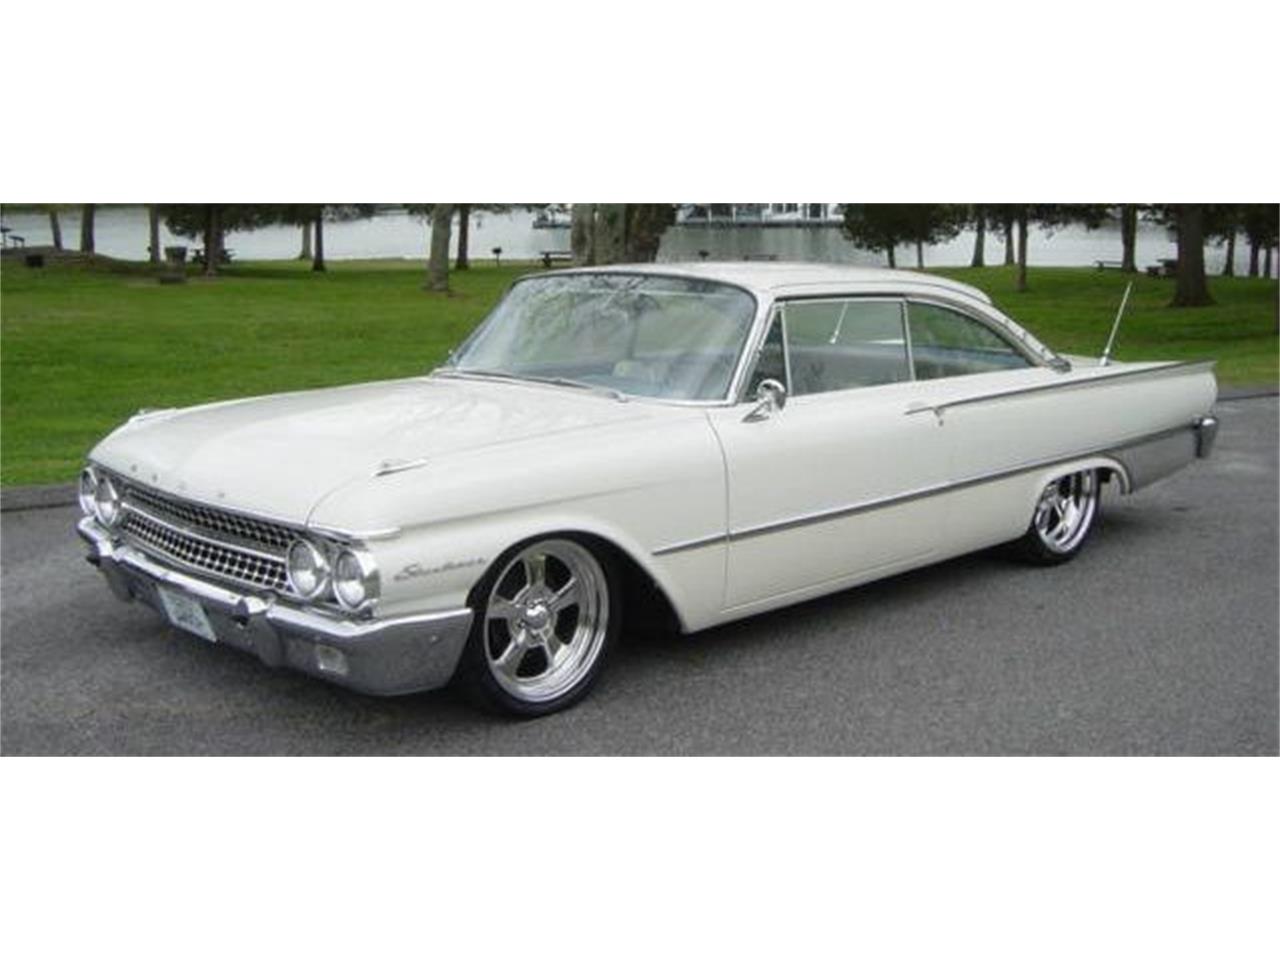 1961 ford galaxie starliner for sale classiccars com cc 1089604 1961 ford galaxie starliner for sale